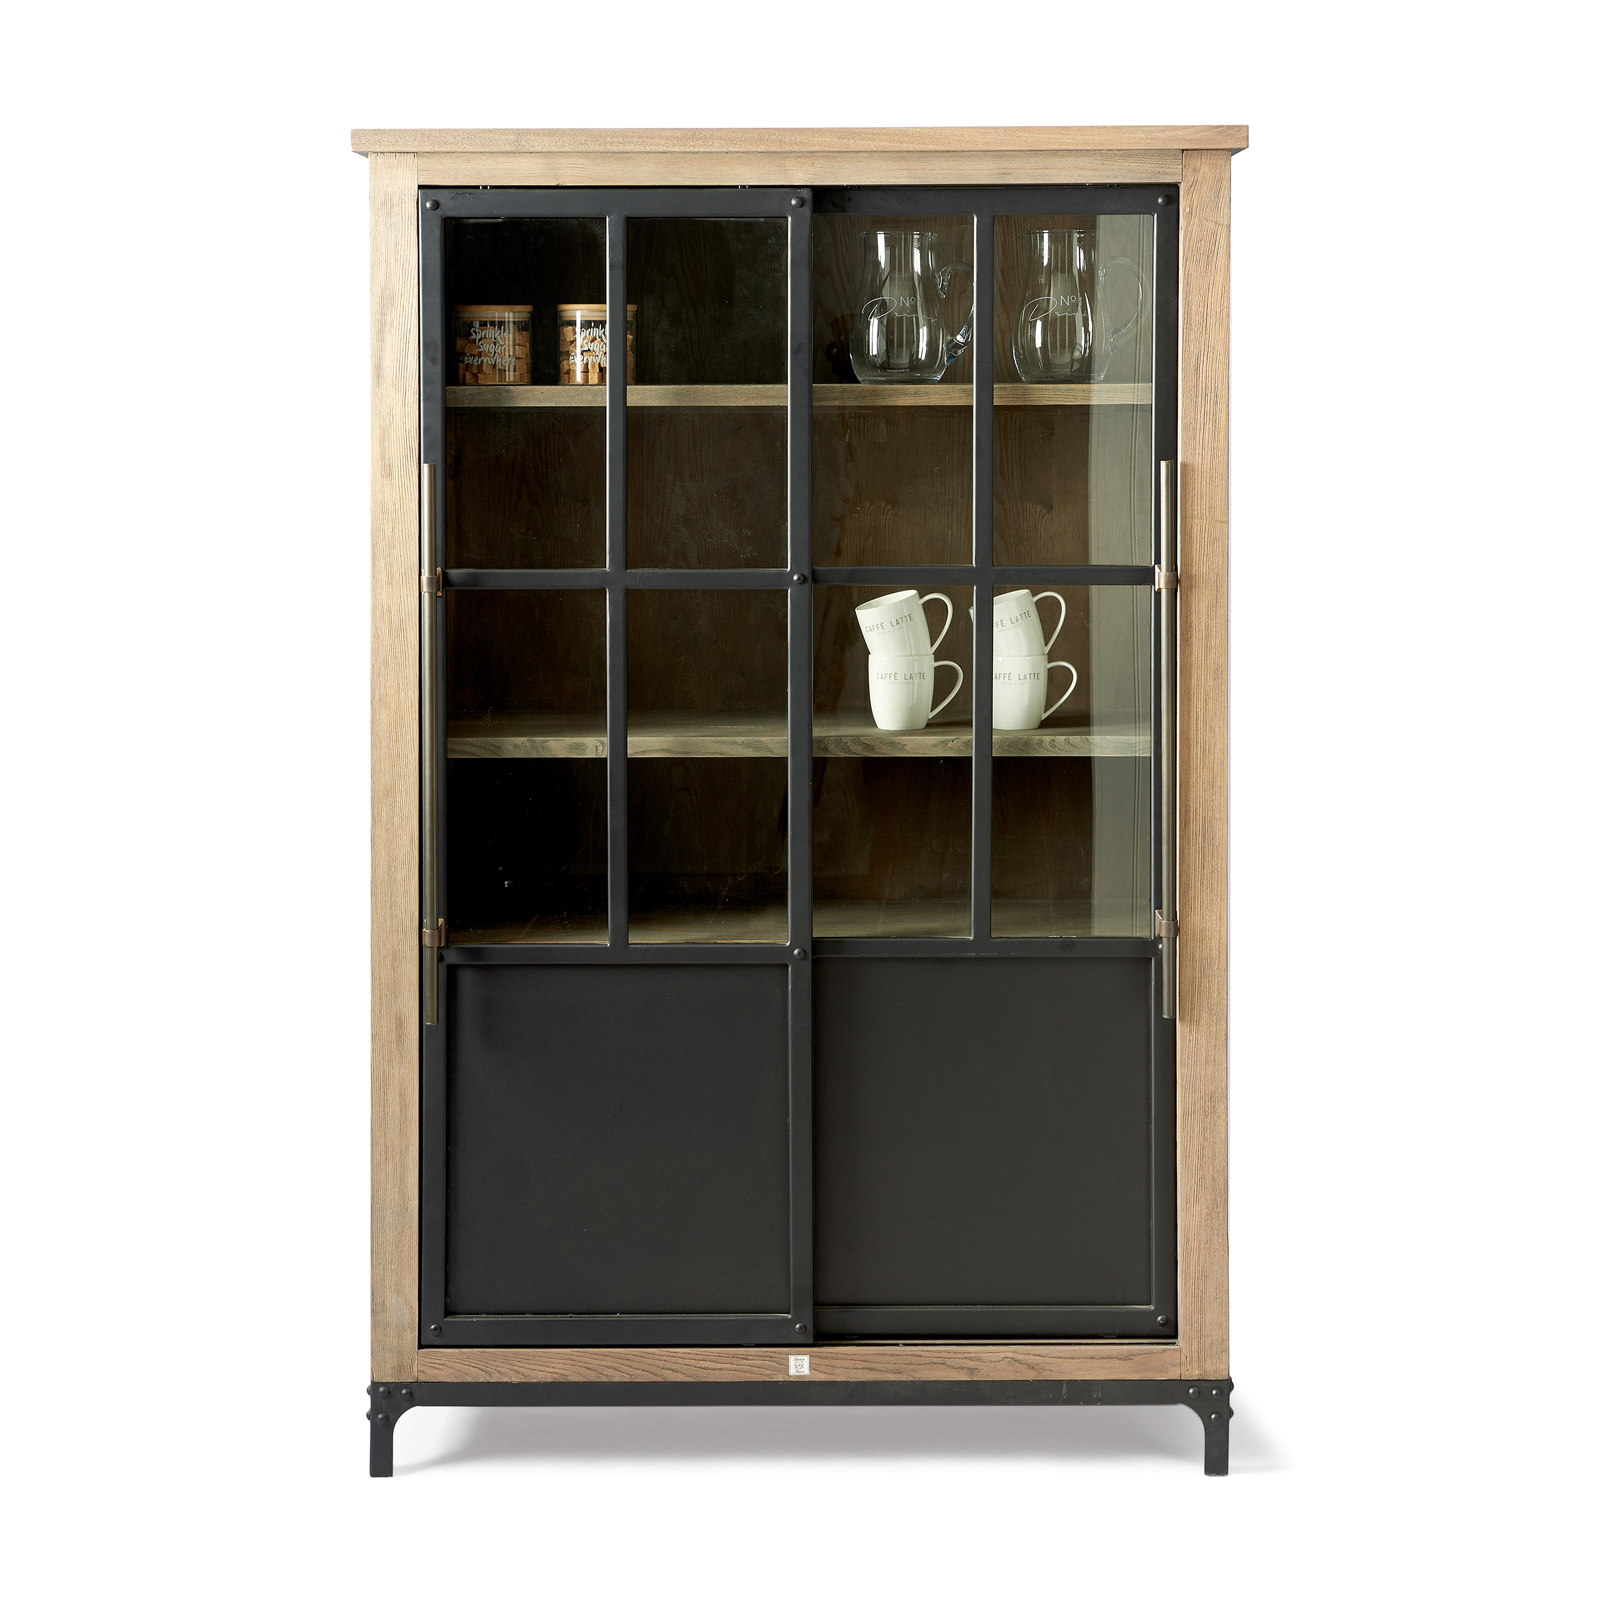 The Hoxton Cabinet Low 